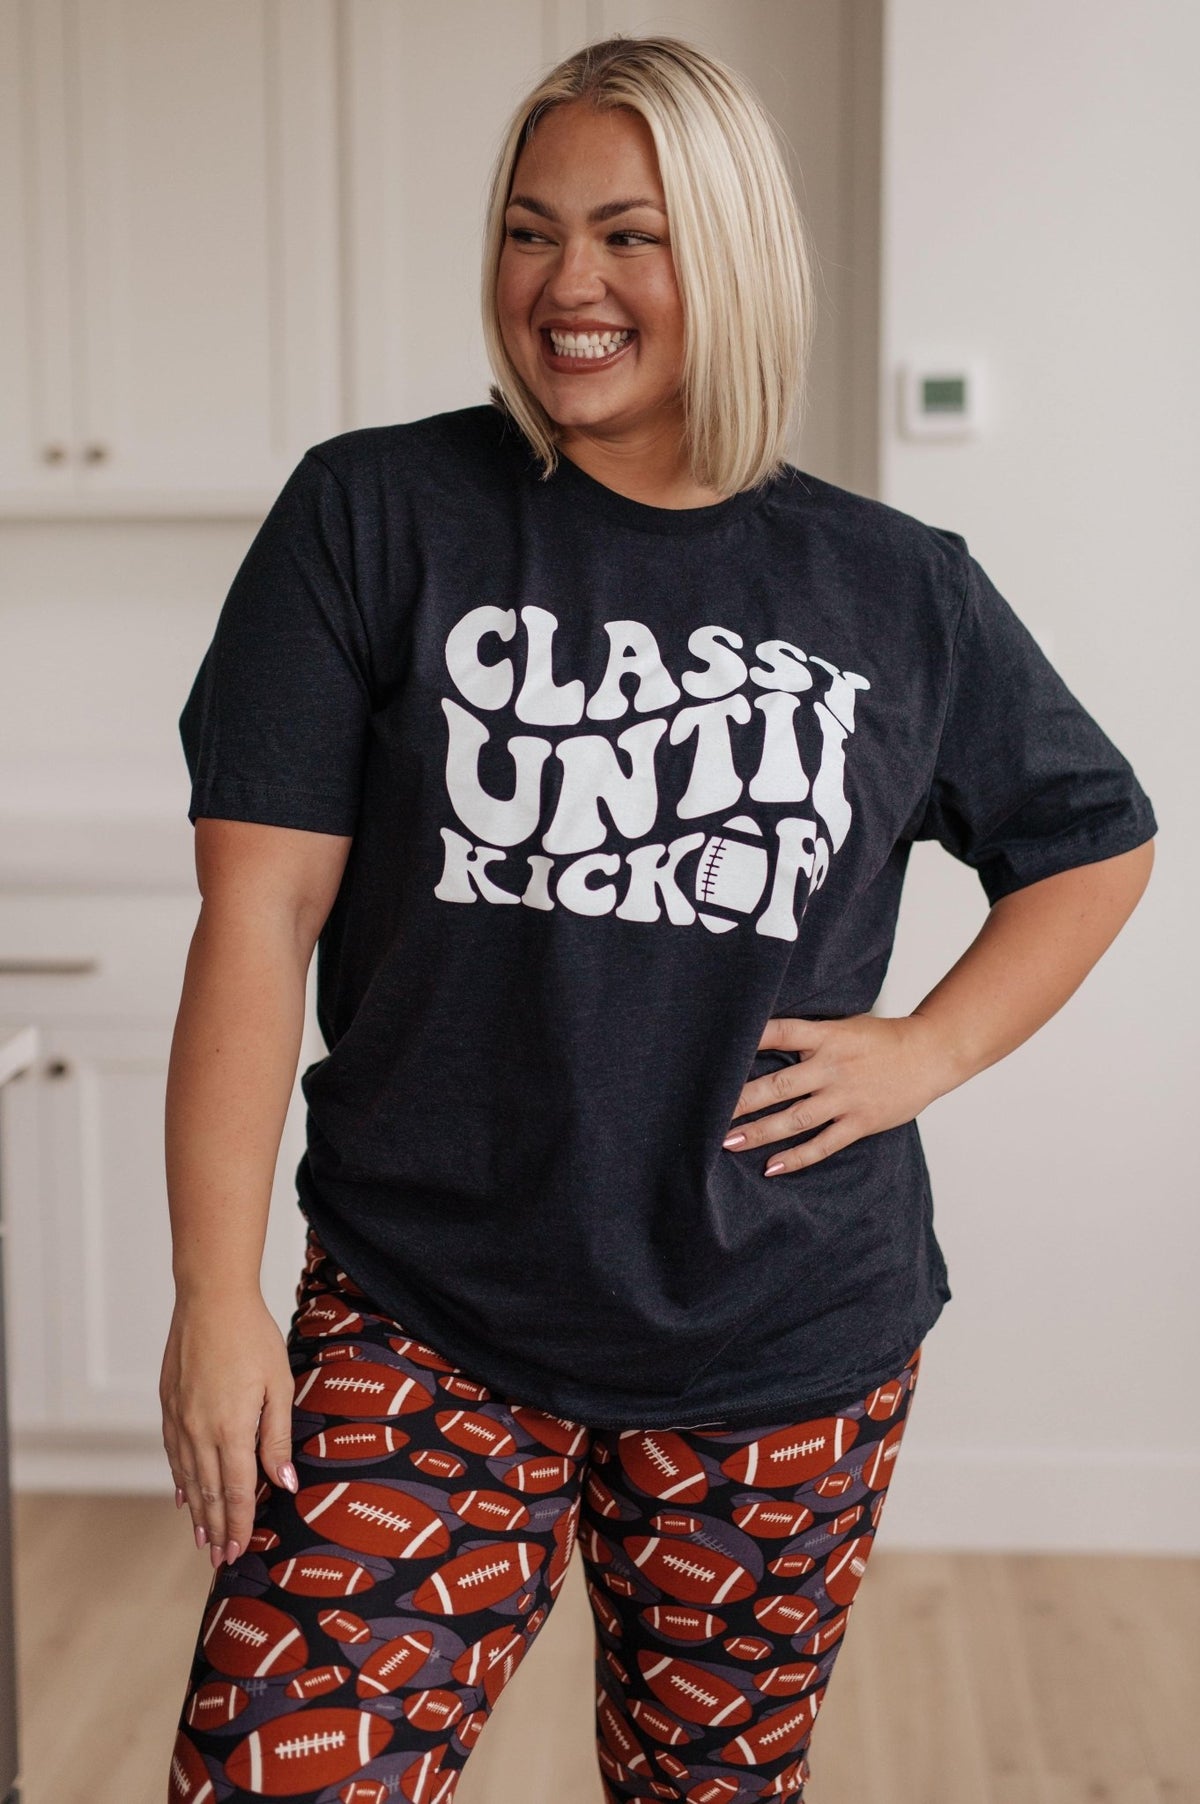 Classy Until Kickoff Tee - Happily Ever Atchison Shop Co.